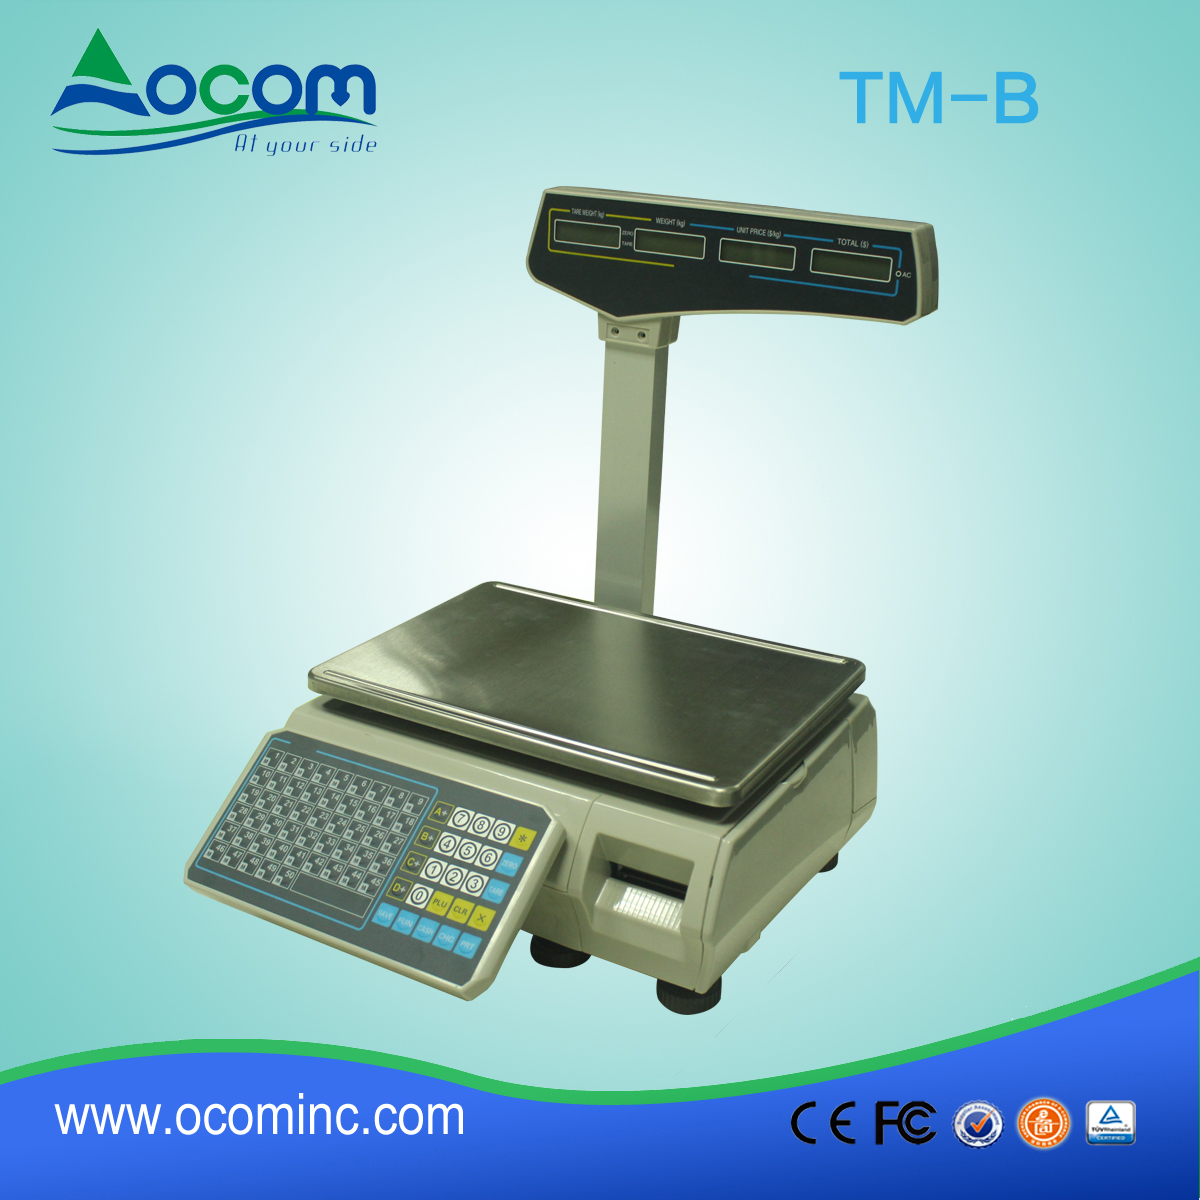 New Products TM-B Barcode Printing Scale